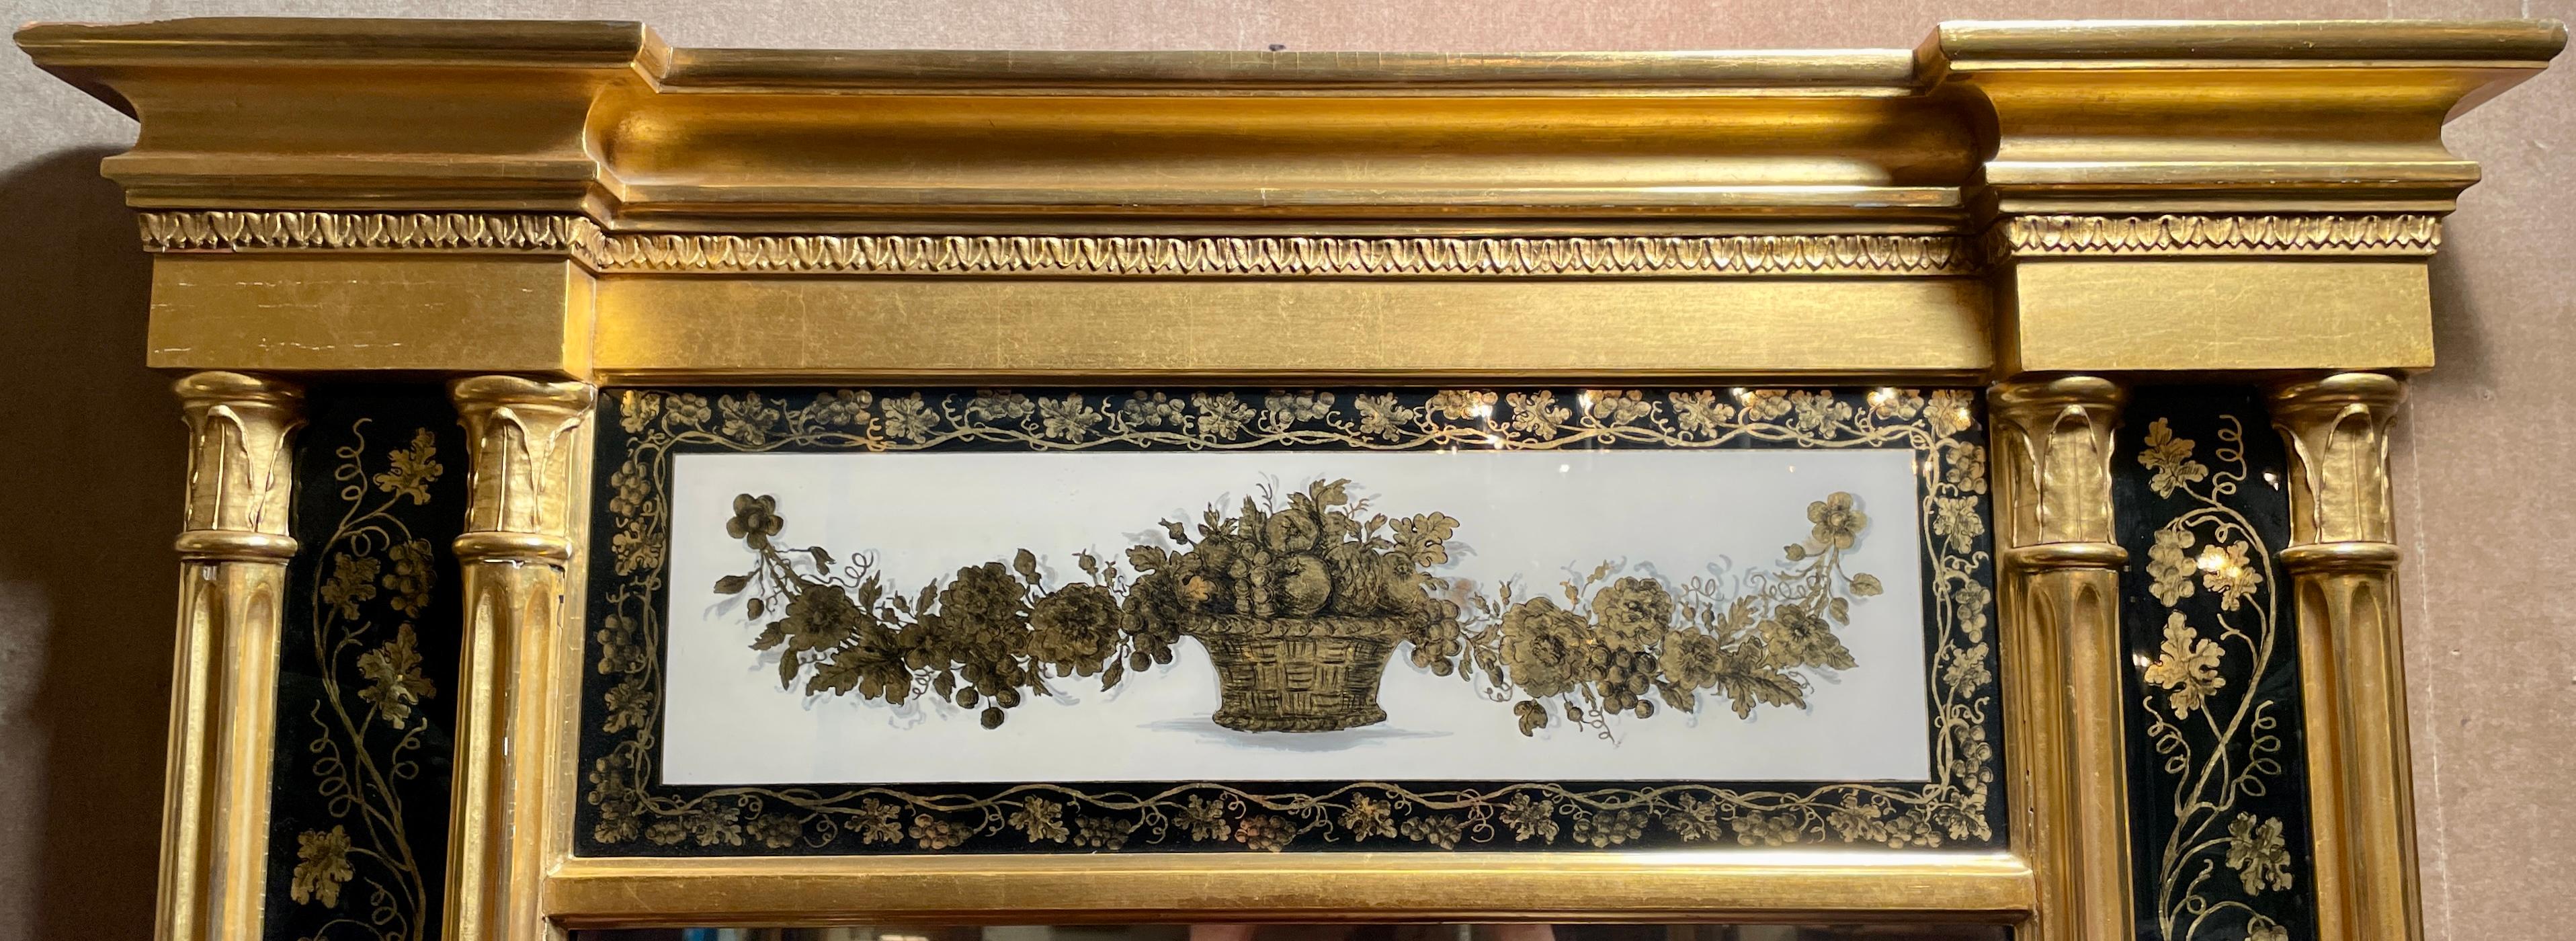 Antique English gold leaf and 